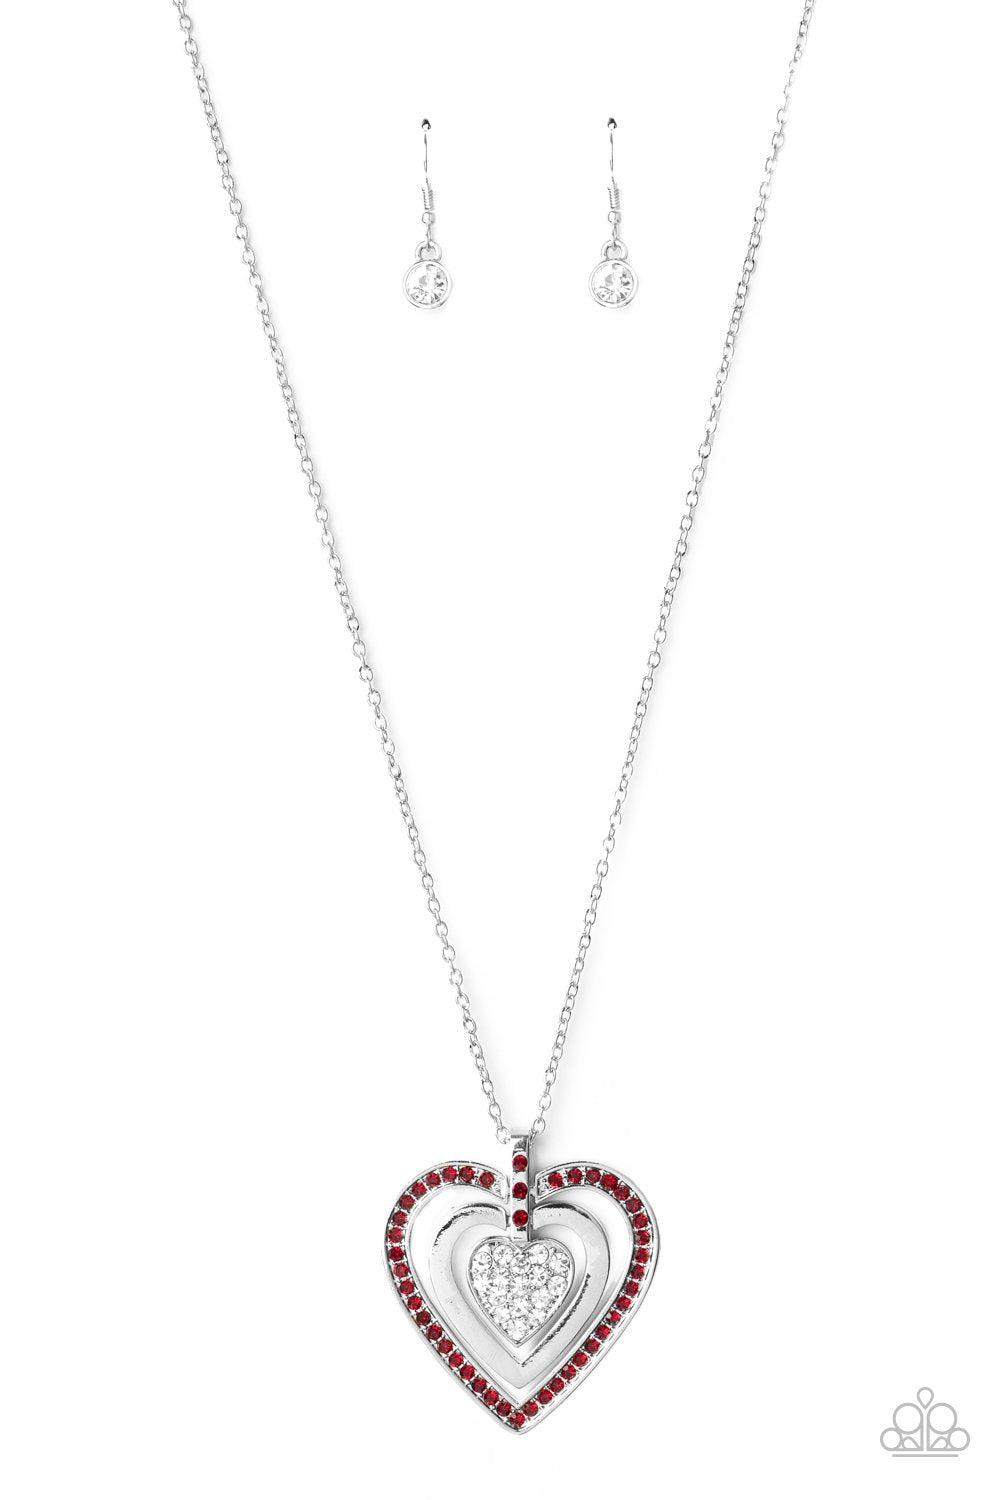 Bless Your Heart Red and White Rhinestone Heart Necklace - Paparazzi Accessories - lightbox -CarasShop.com - $5 Jewelry by Cara Jewels